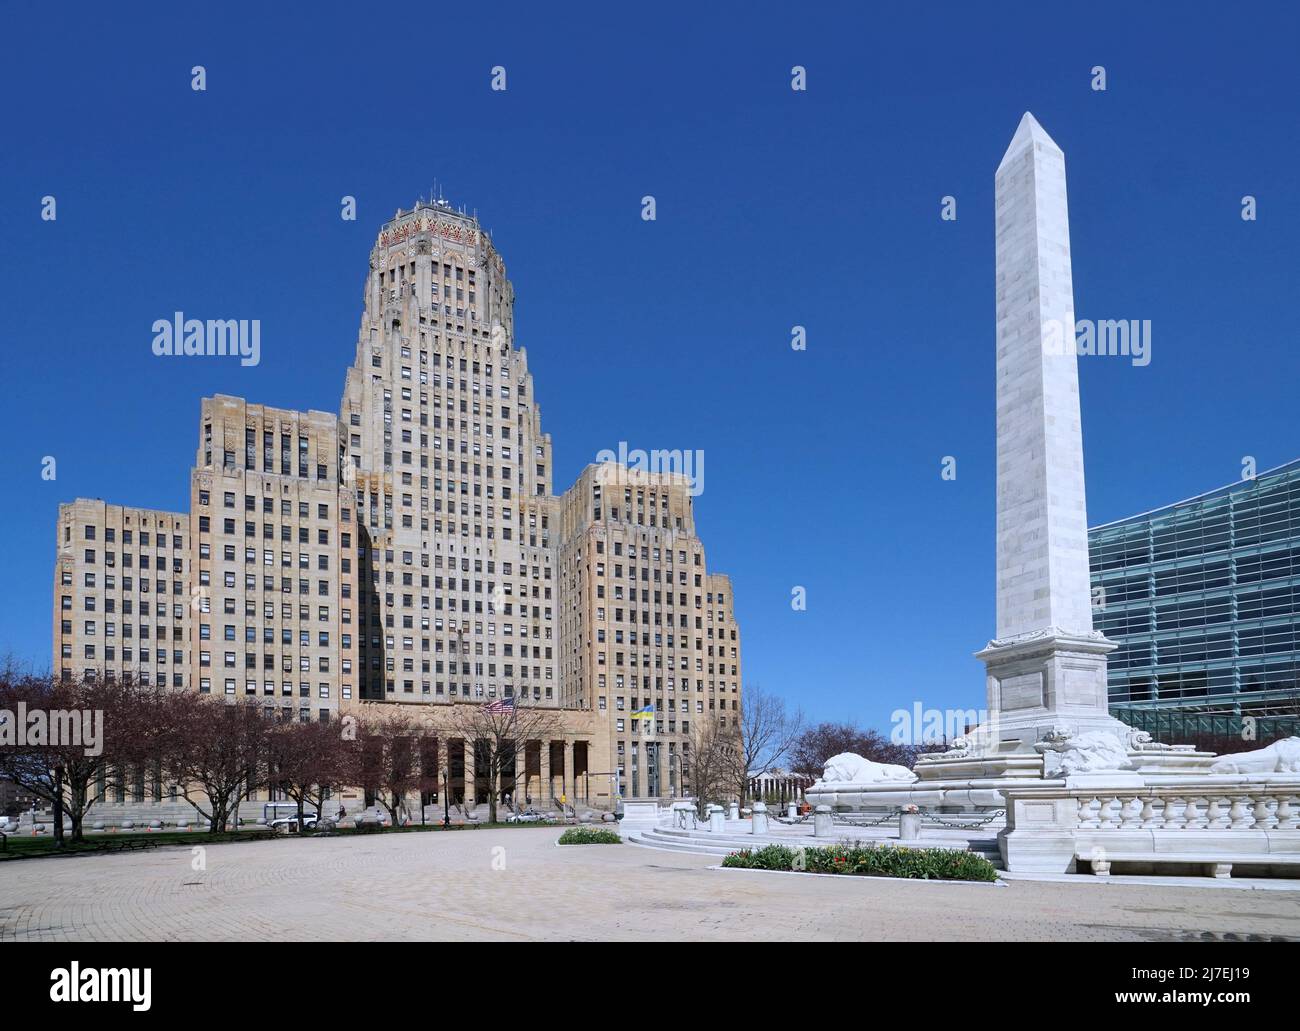 The art deco style city hall building in Buffalo with a monument to President McKinley, who was assassinated there in 1901 Stock Photo